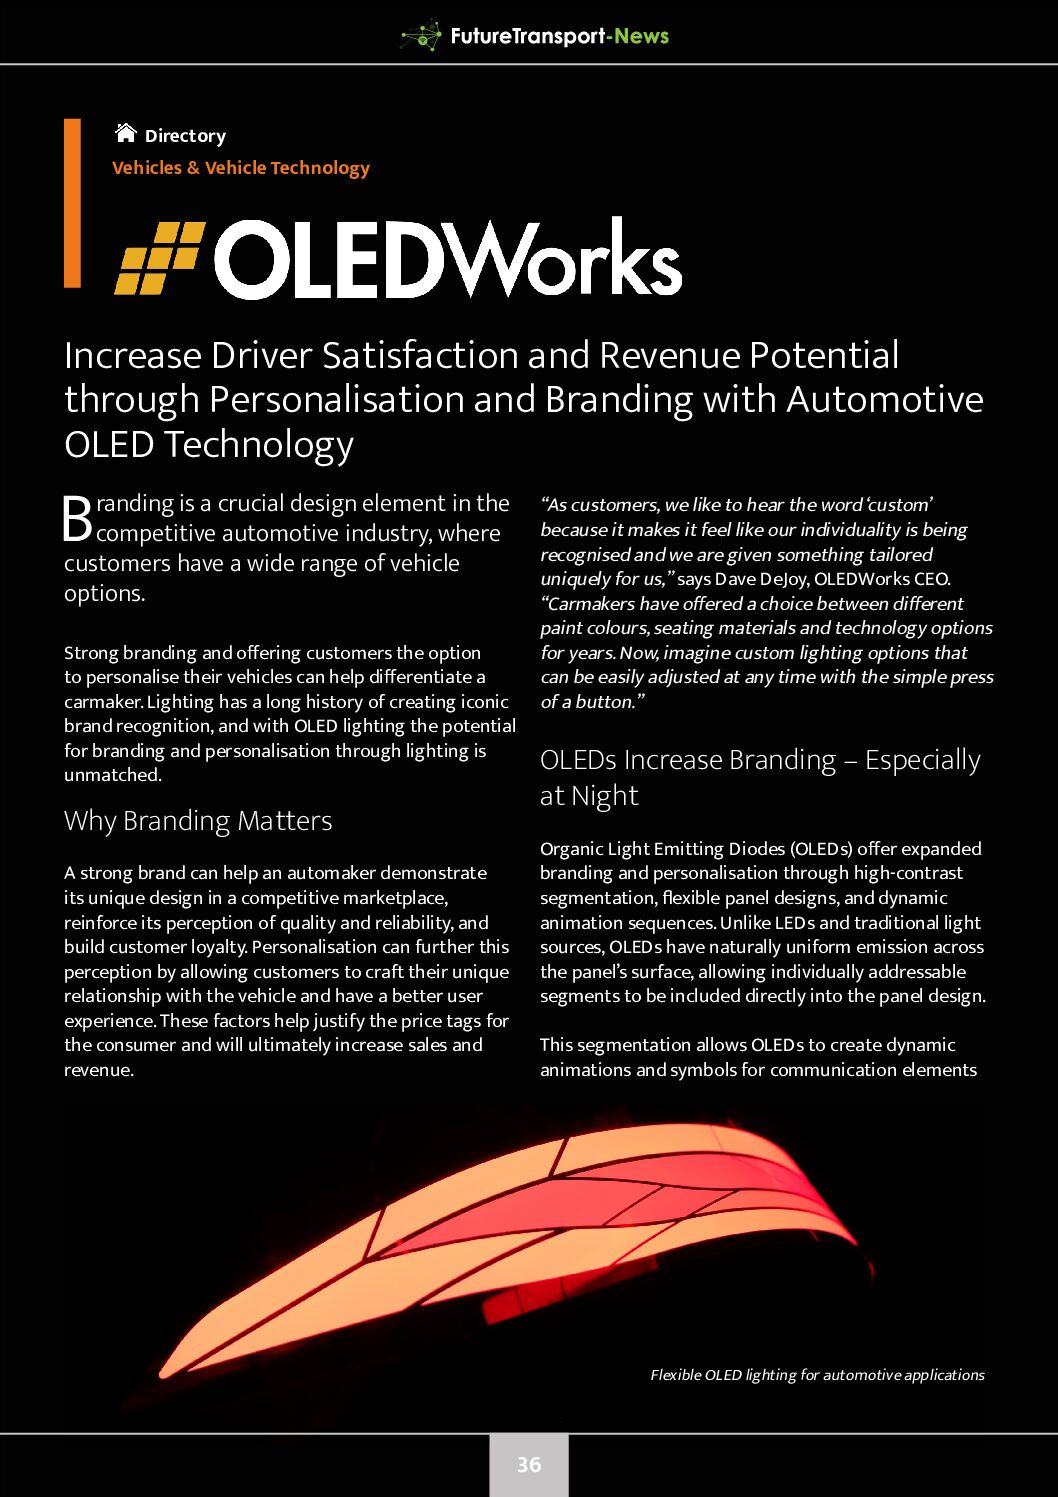 OLEDWorks: Increase Driver Satisfaction and Revenue Potential